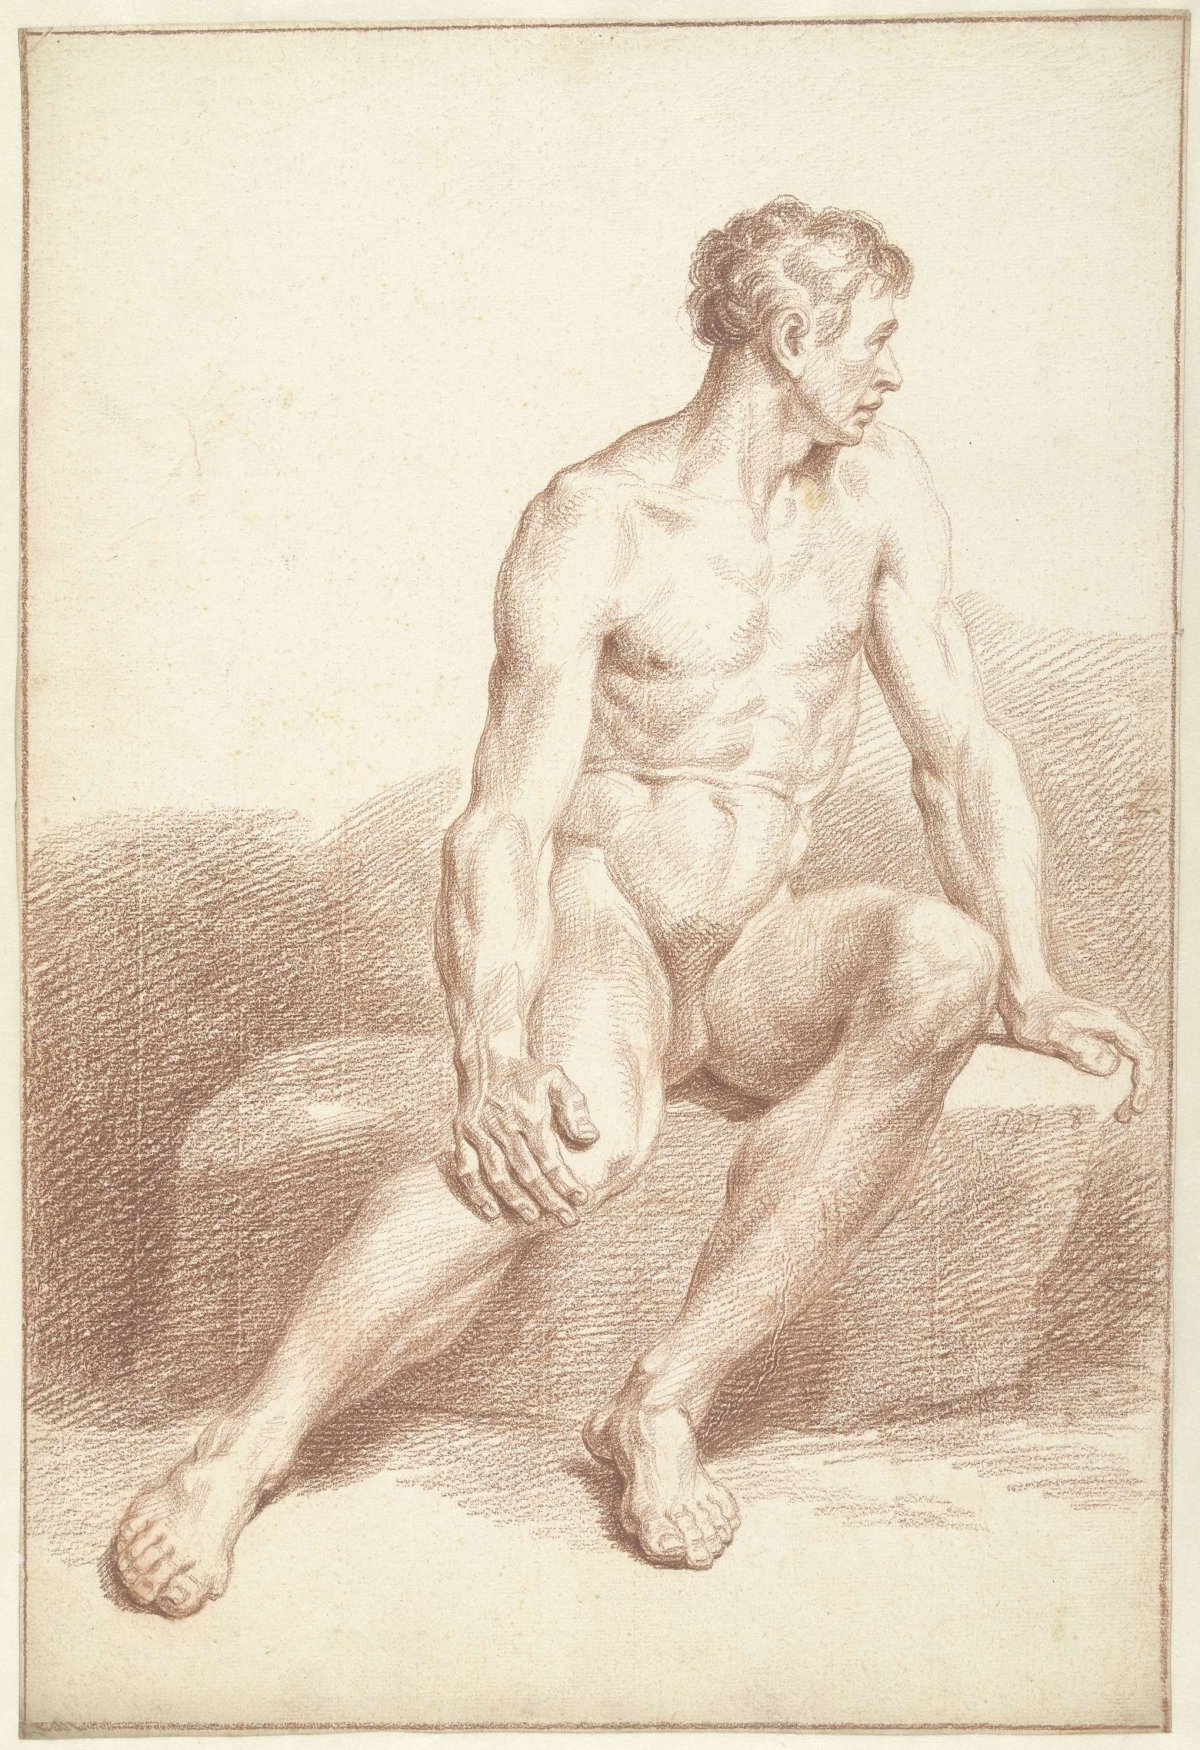 Male nude, seated, facing right, Louis Fabritius Dubourg, 1727